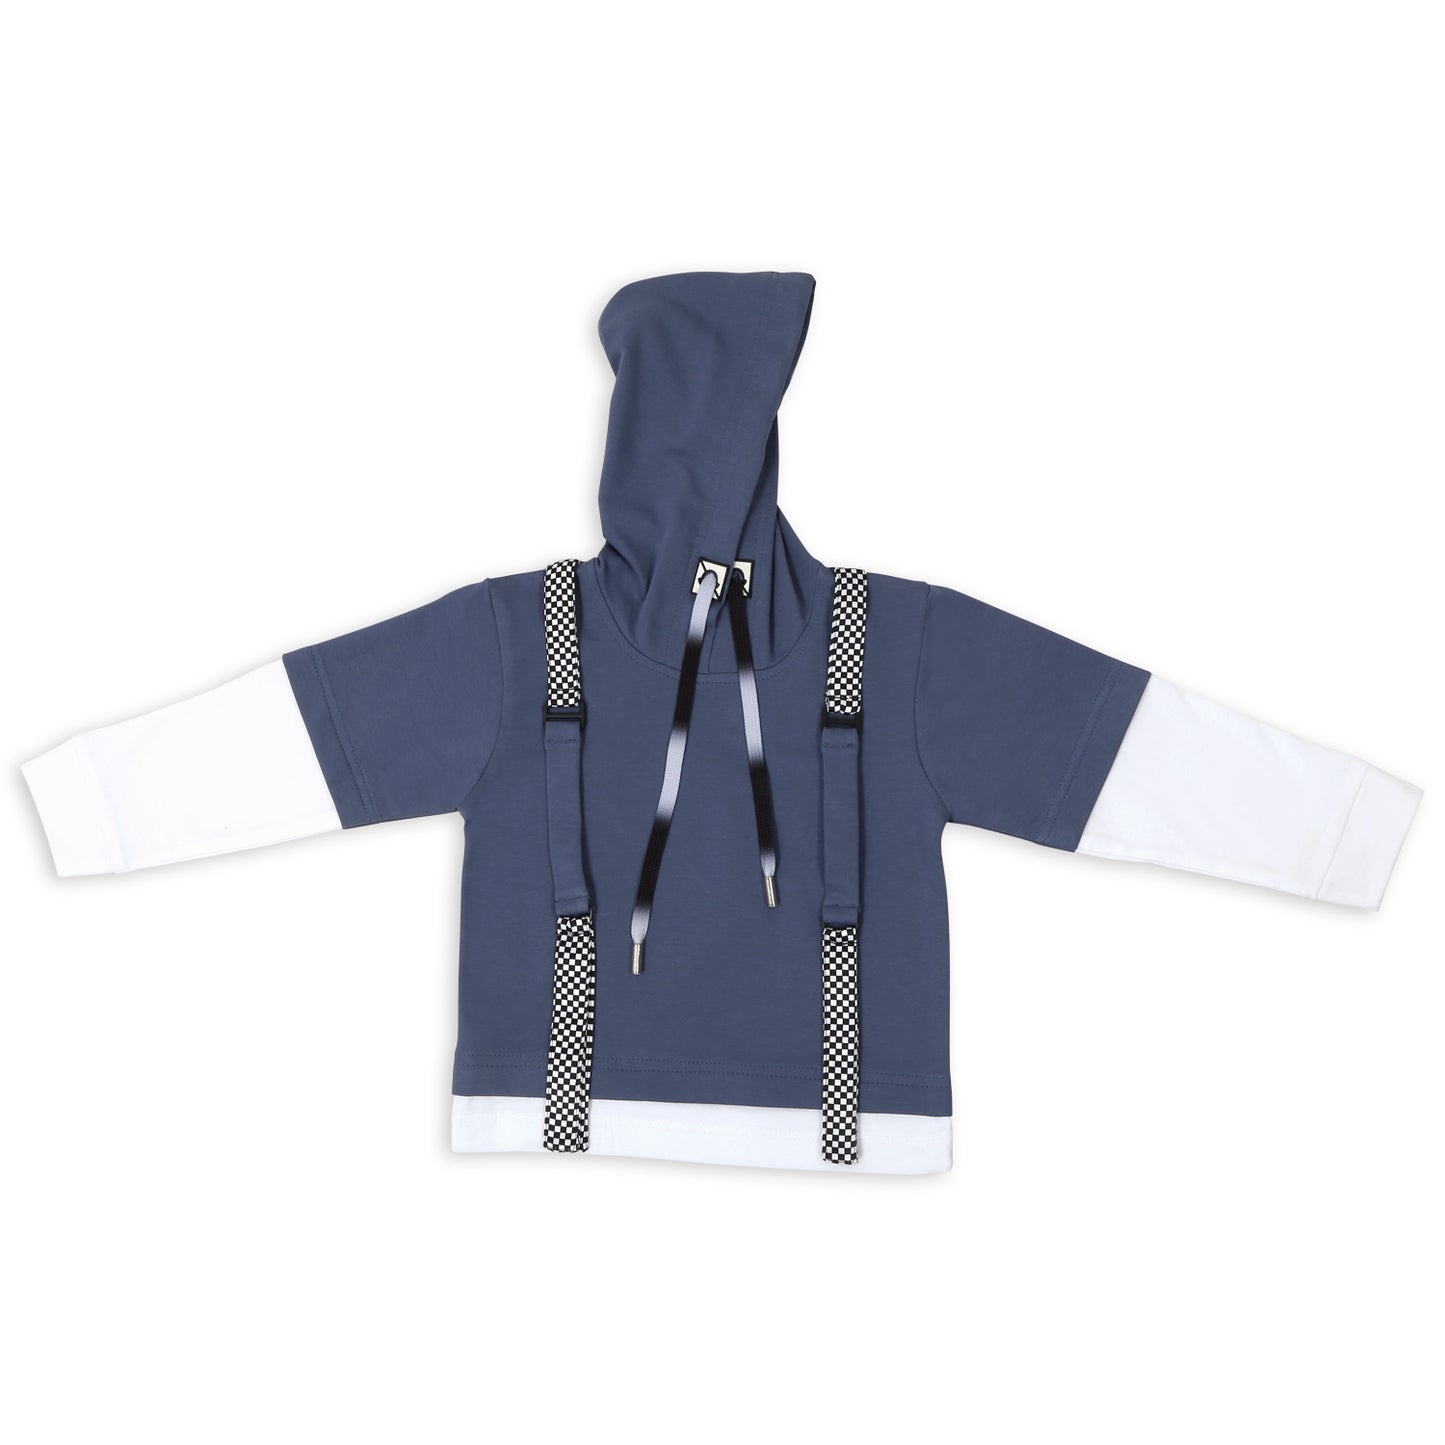 "Tiny Trendsetters Unite! Cool Hoodie & Joggers Set for Little Dudes."